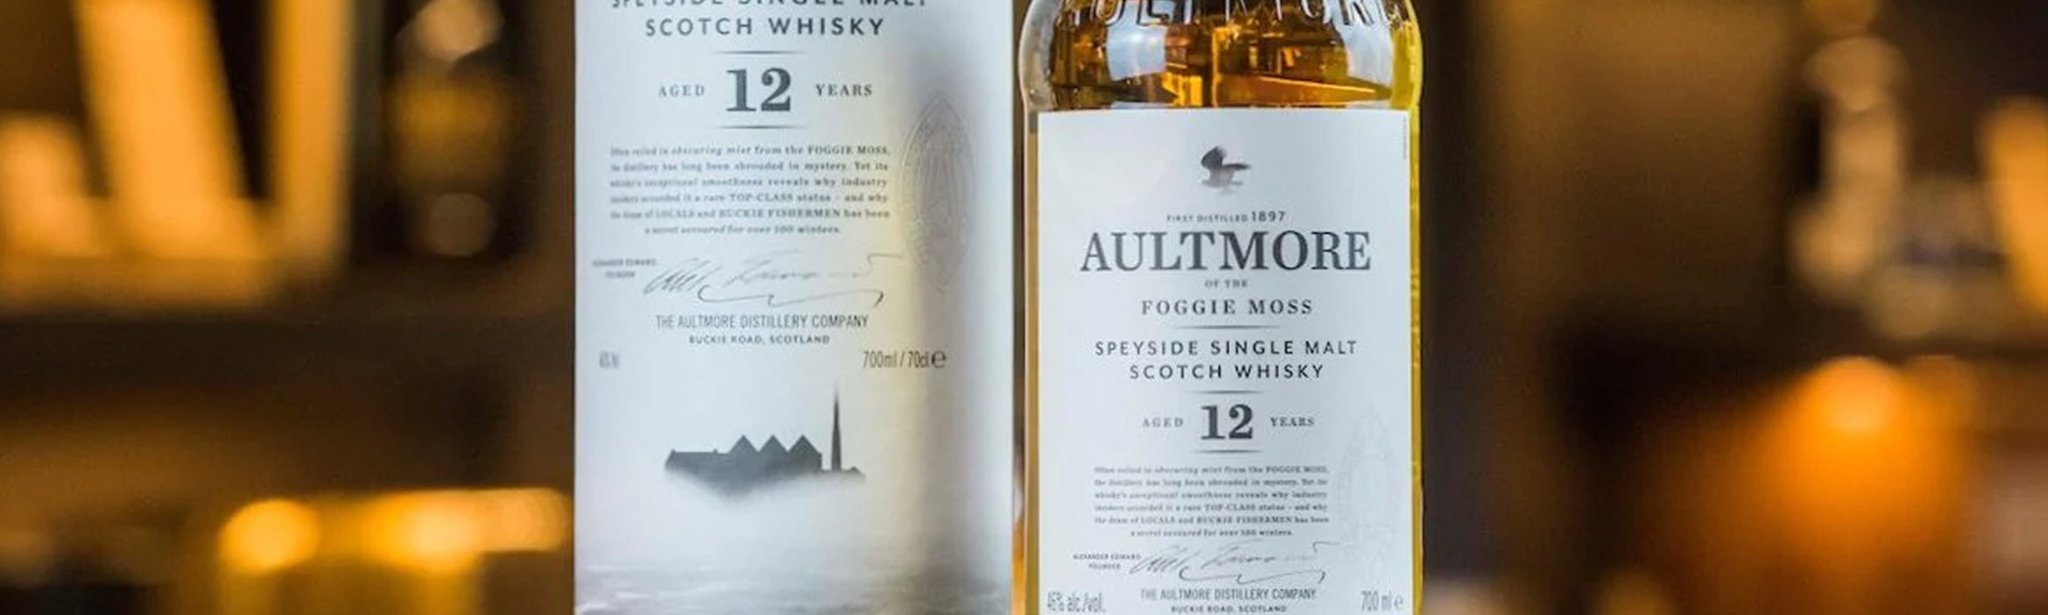 Aultmore - The Bottle Club